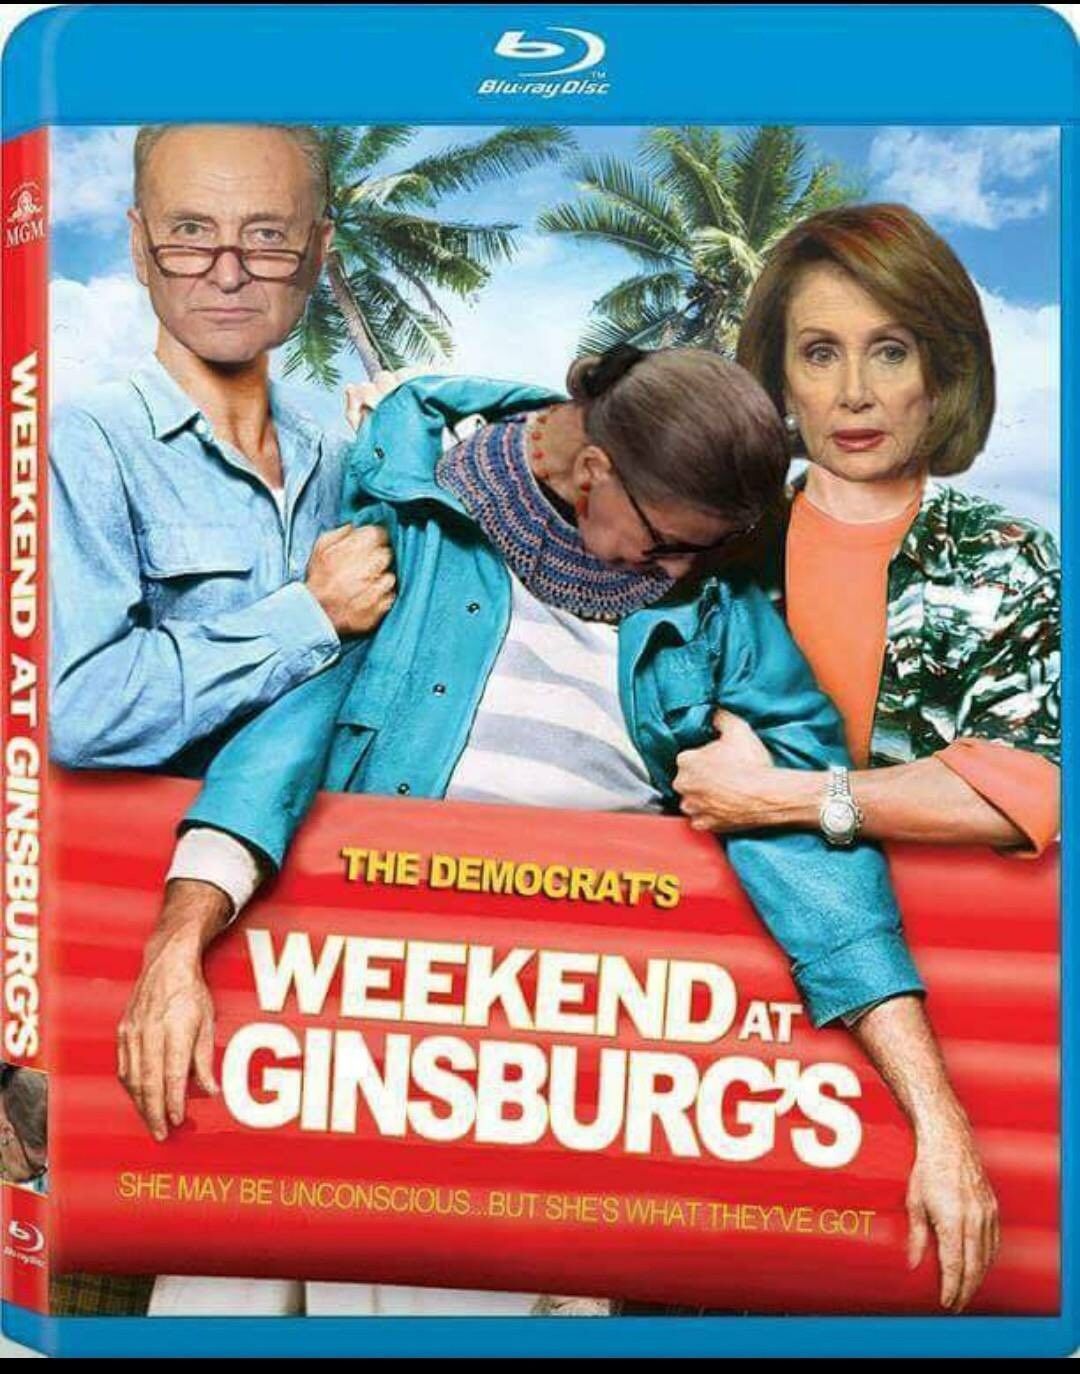 weekend at bernies - Bluray Disc Mcu Weekend At Ginsburgs The Democrats Weekendat Ginsburg'S She May Be Unconscious..But She'S What Theyve Got